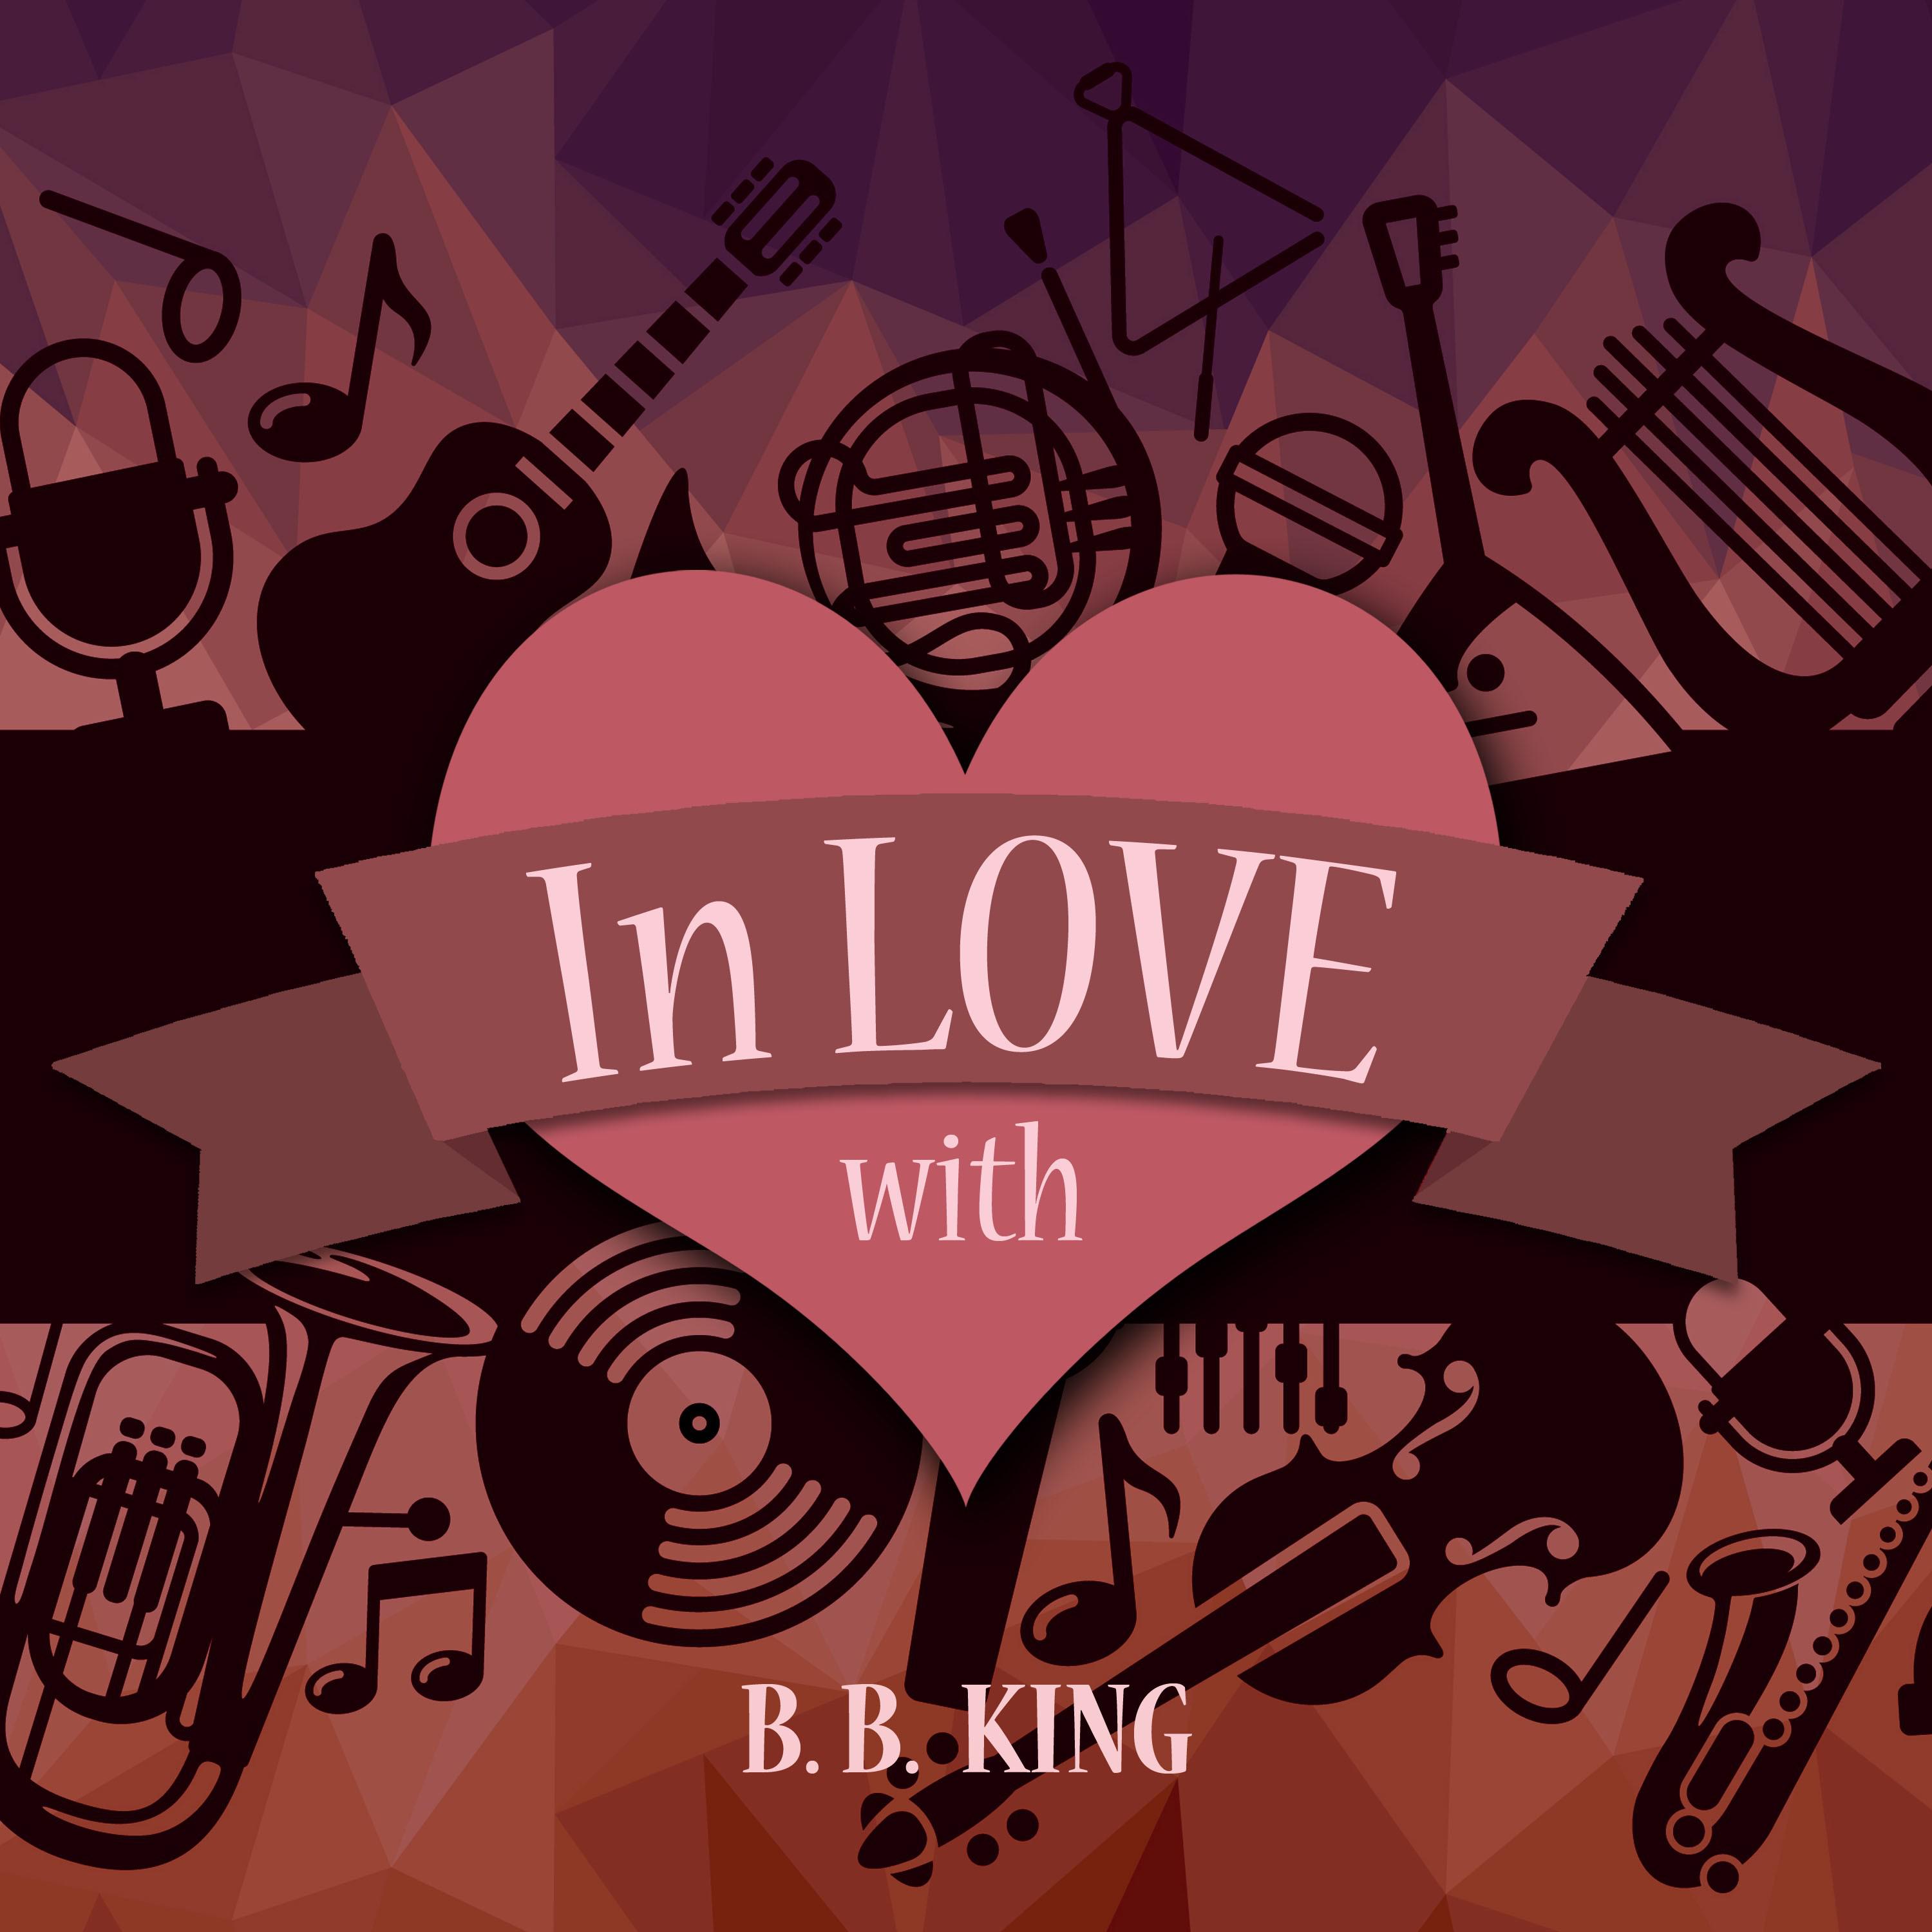 In Love with B.B. King